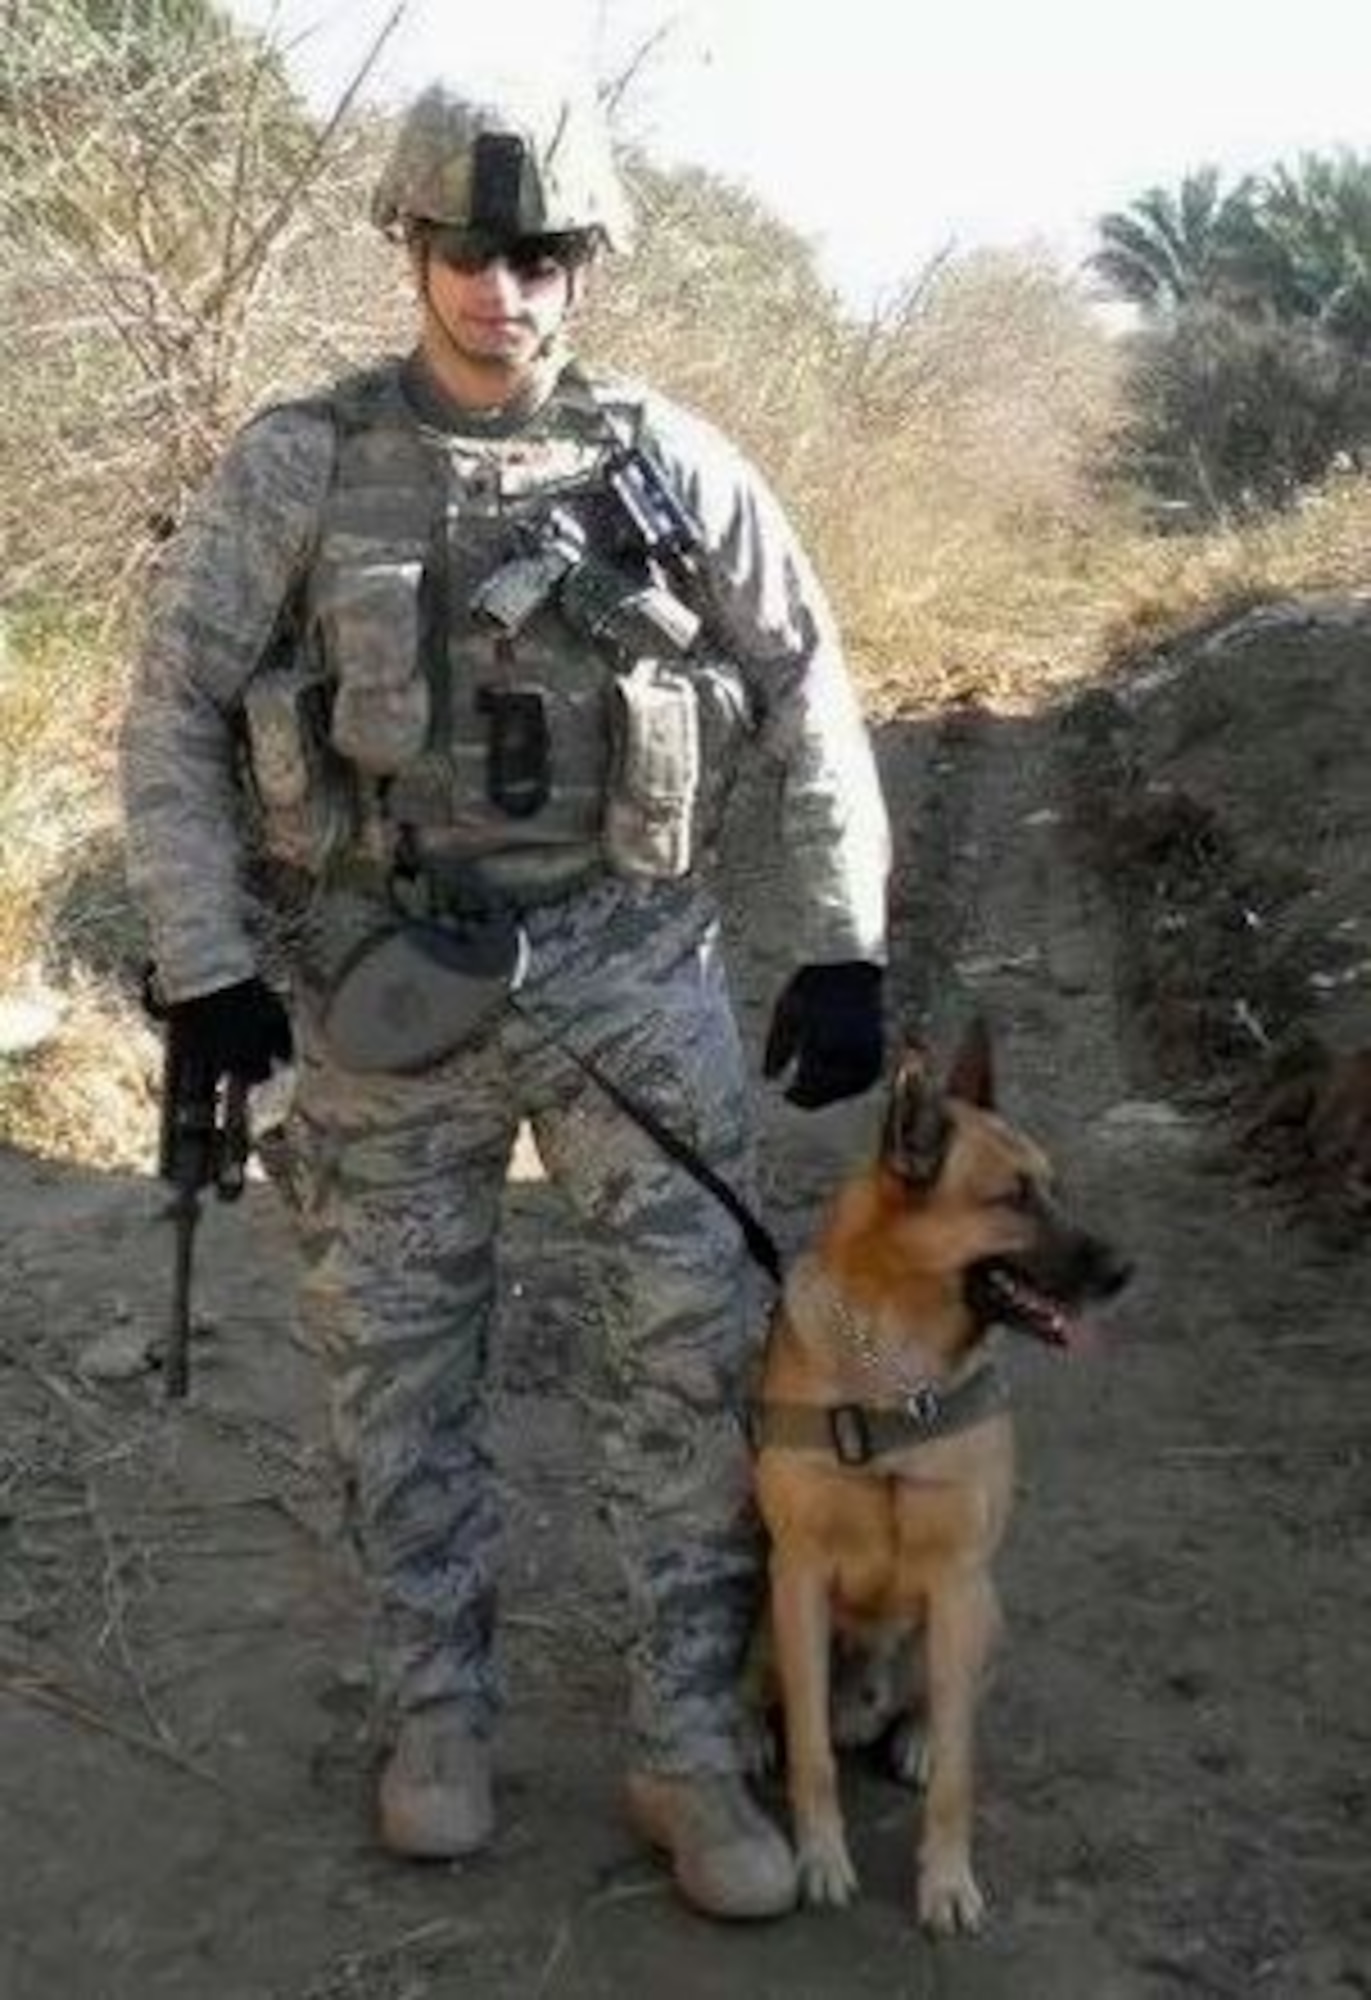 Tech. Sgt. Aaron DeMarte stands with Arco, retired Military Working Dog,
while deployed to the Middle East. (U.S. Air Force courtesy photo)
